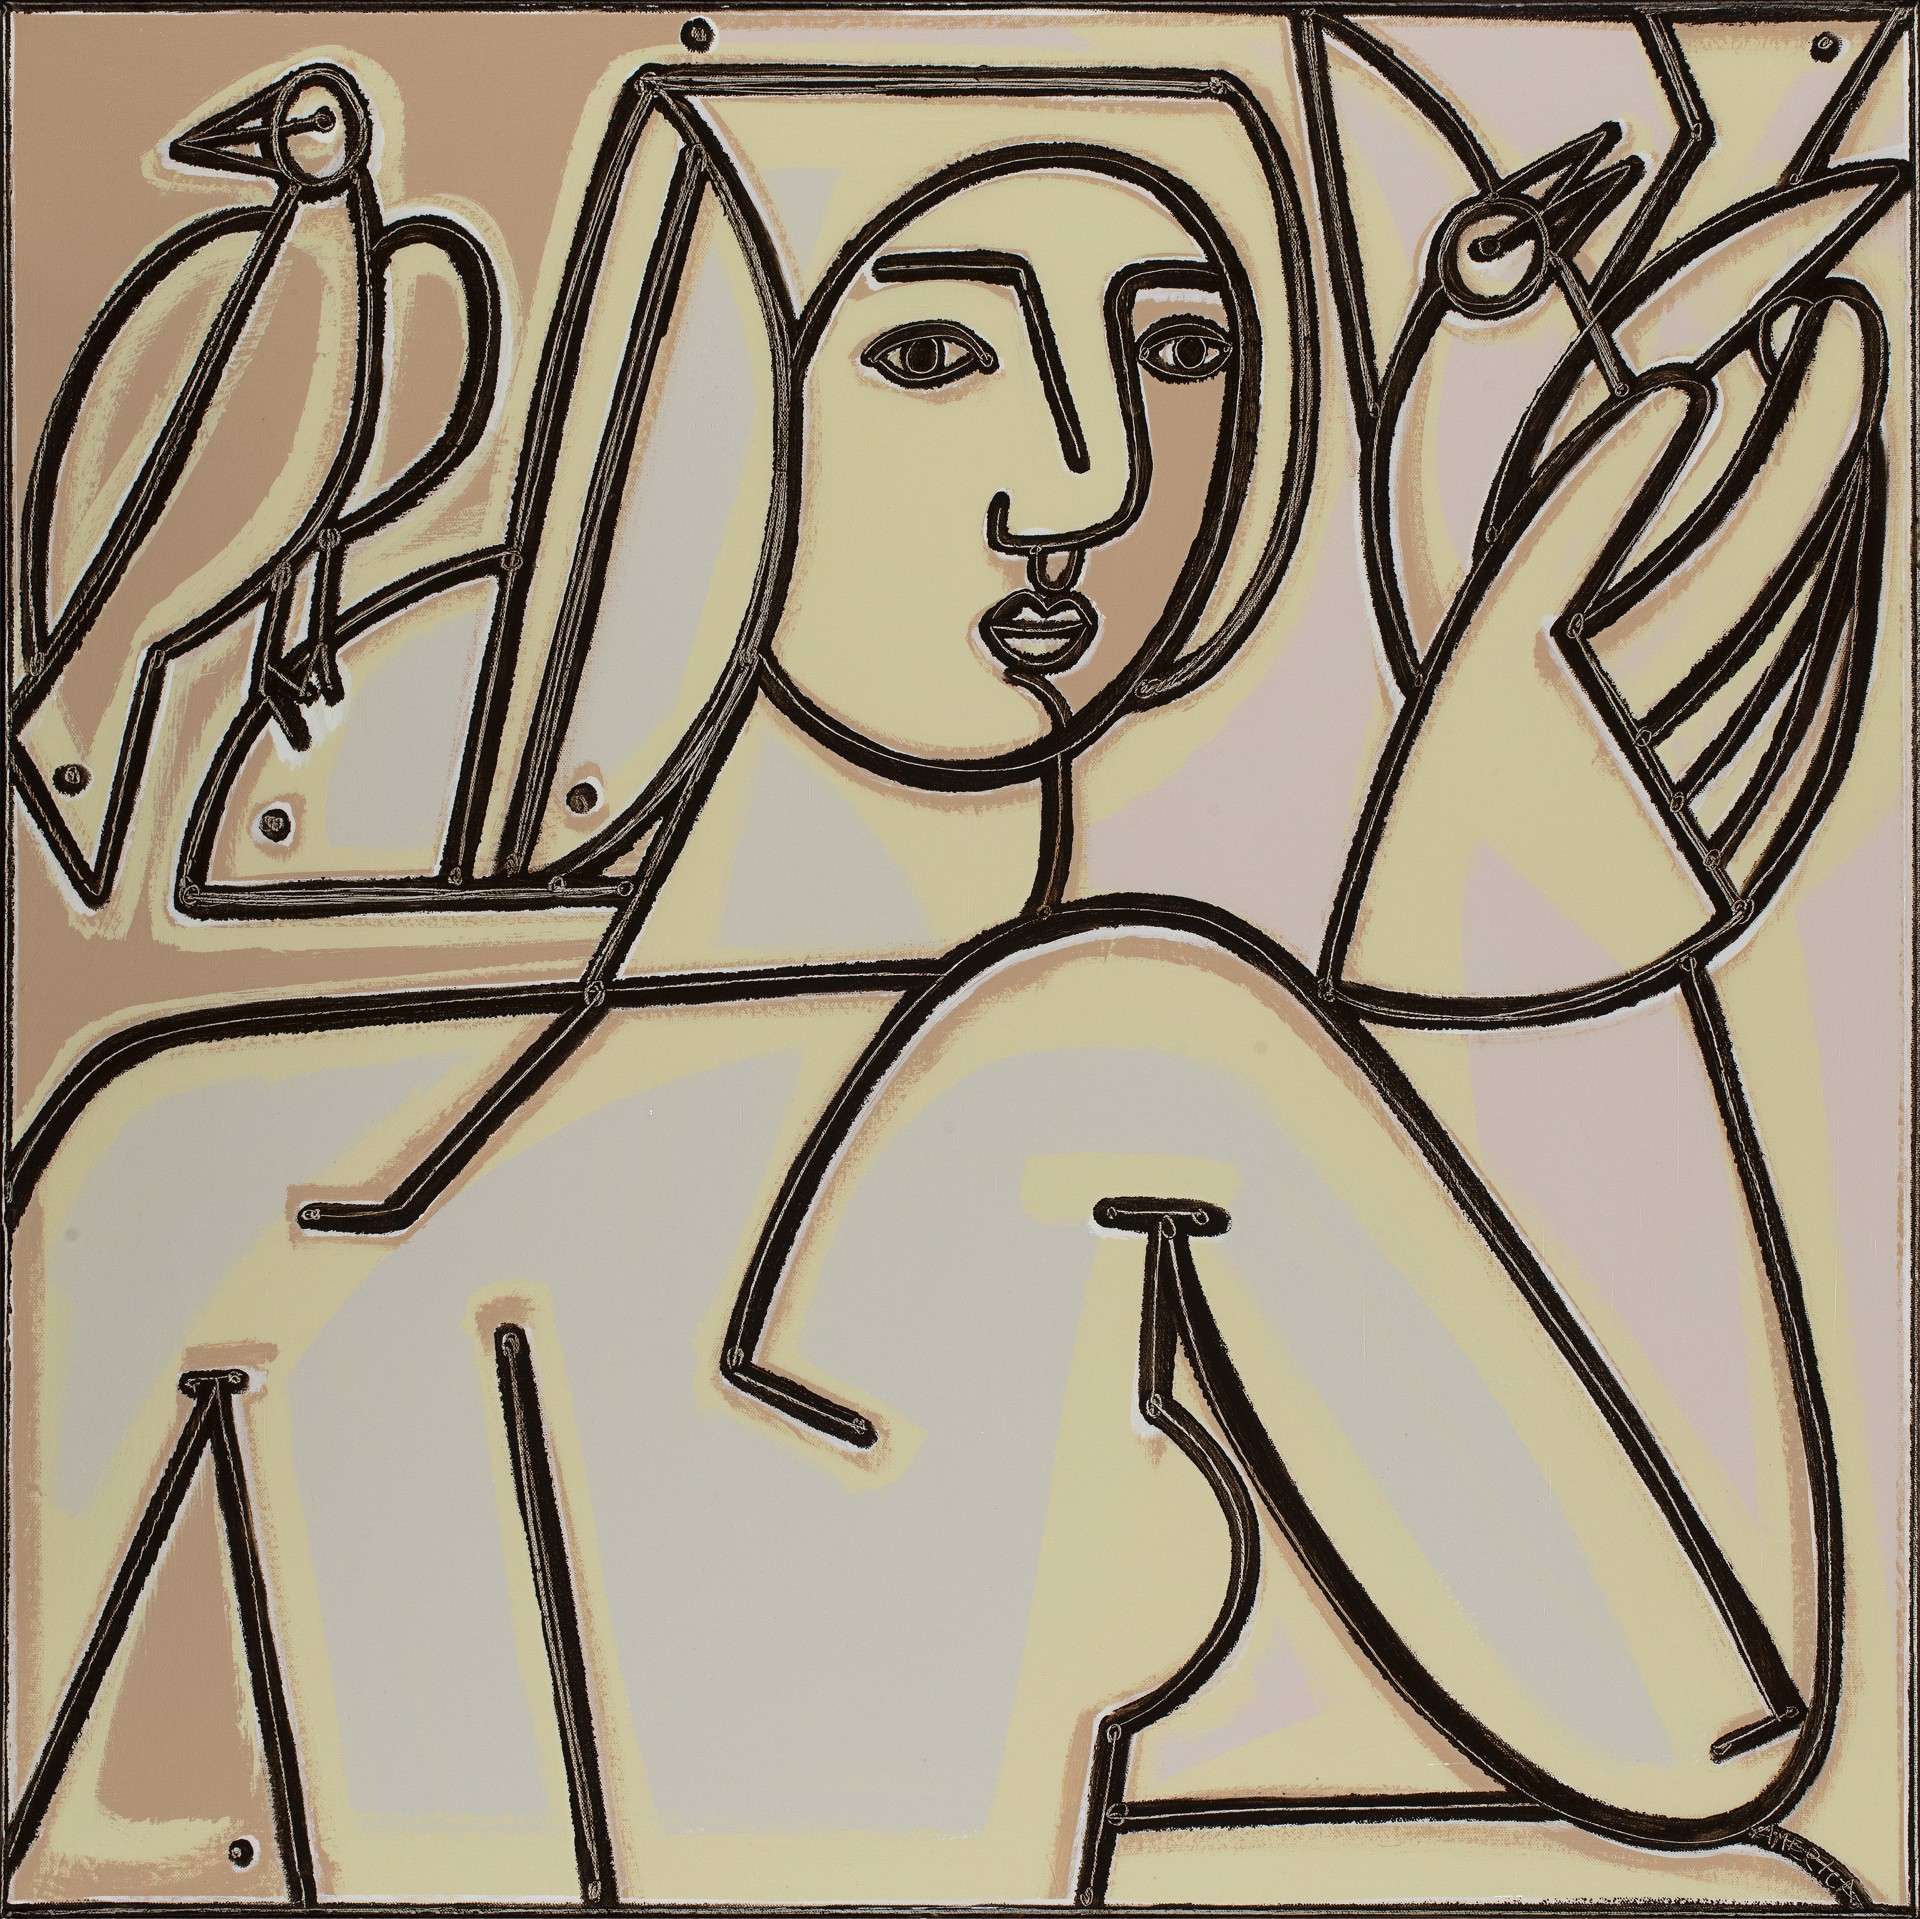 WOMAN WITH DOVES by AMERICA MARTIN